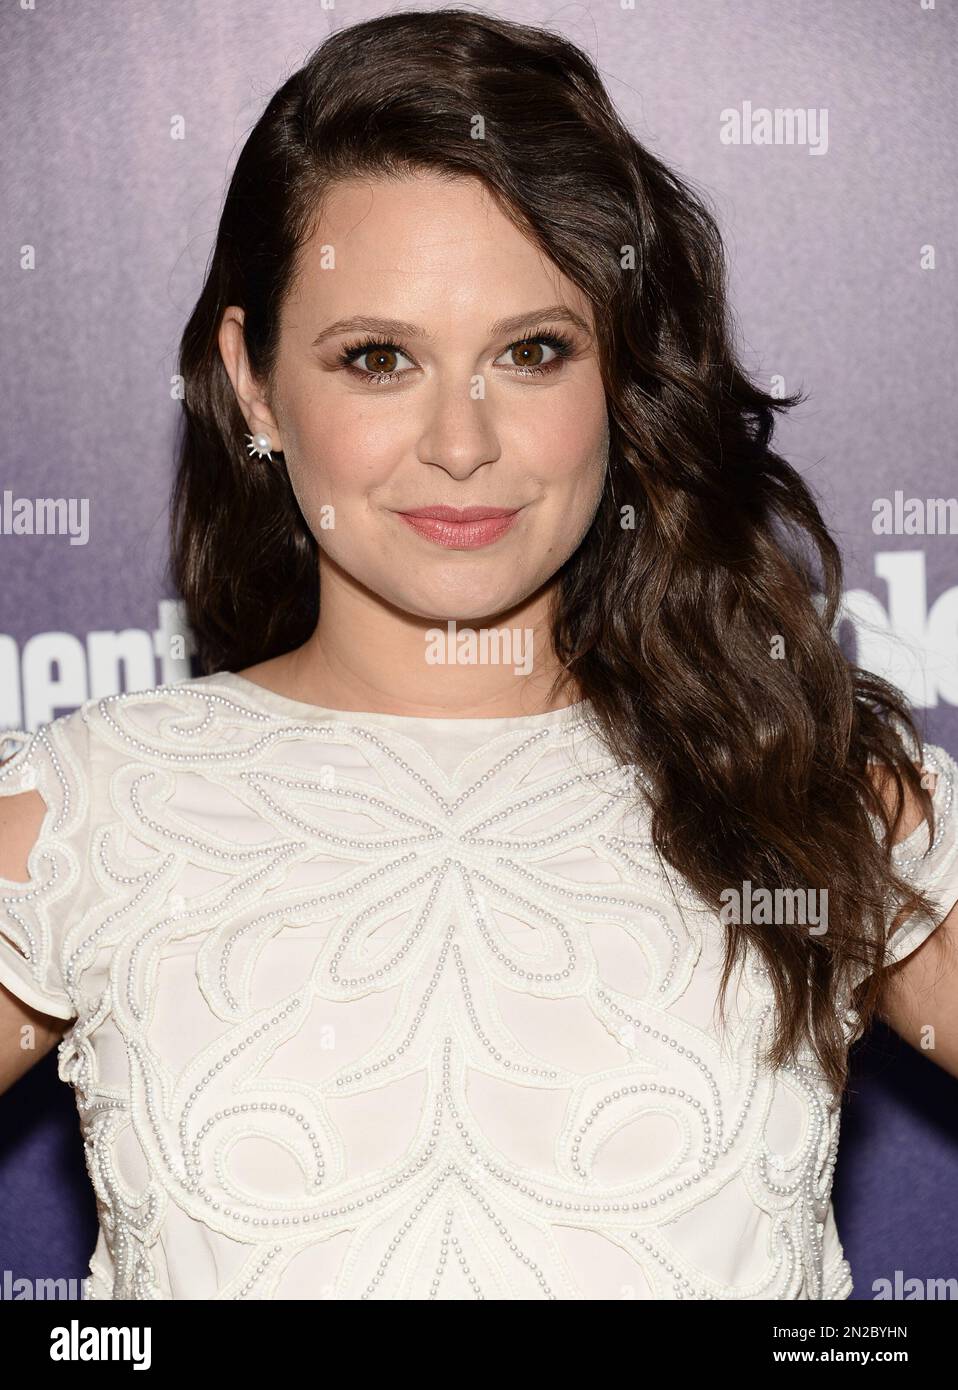 Actress Katie Lowes Attends The Entertainment Weekly And People New